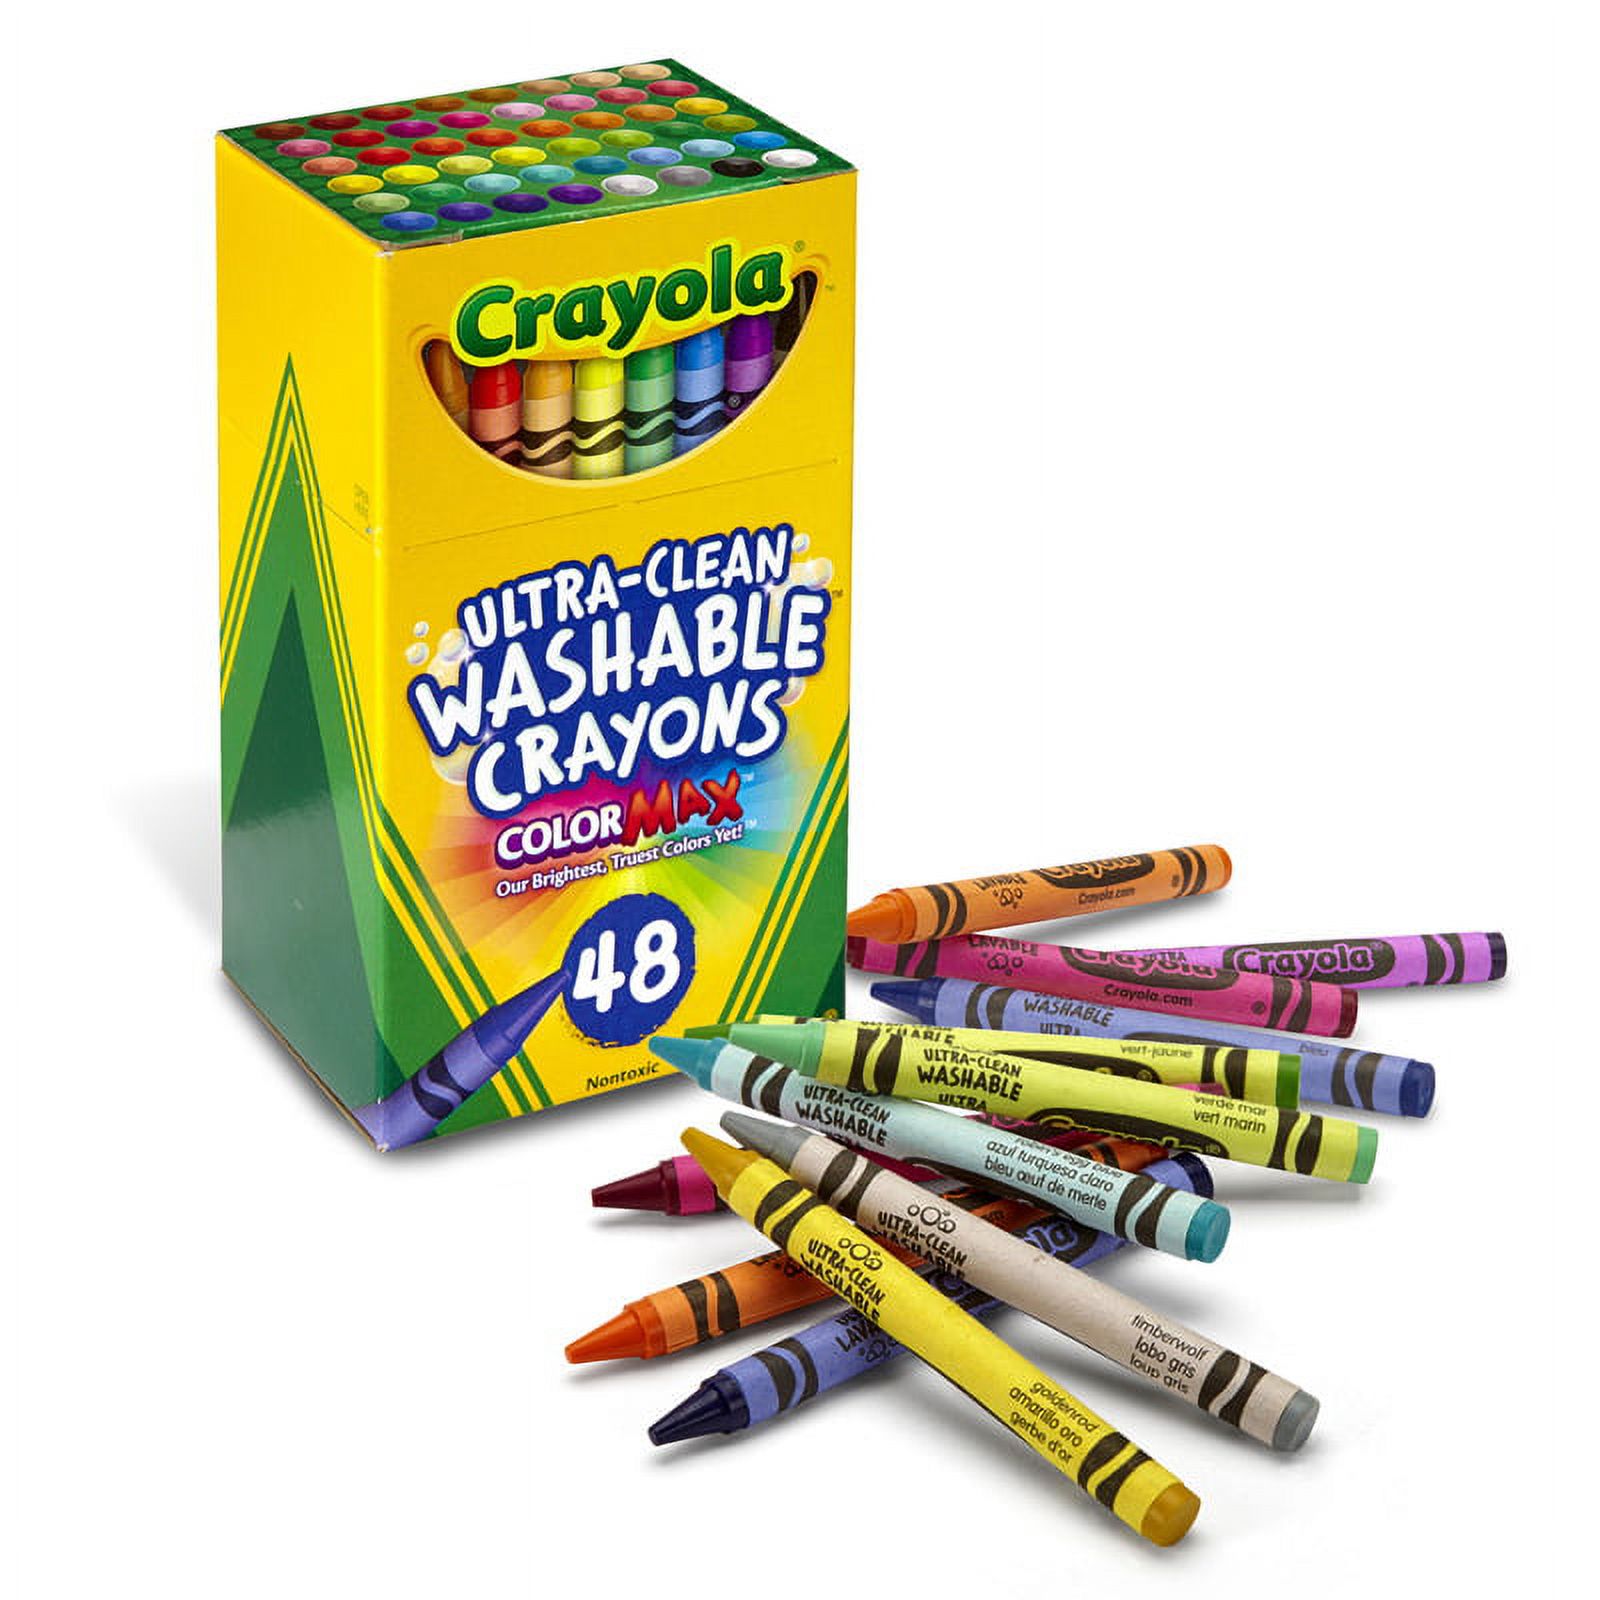 Ultra-Clean Washable Crayons, Regular Size, Pack of 48 | Bundle of 10 Packs - image 1 of 1